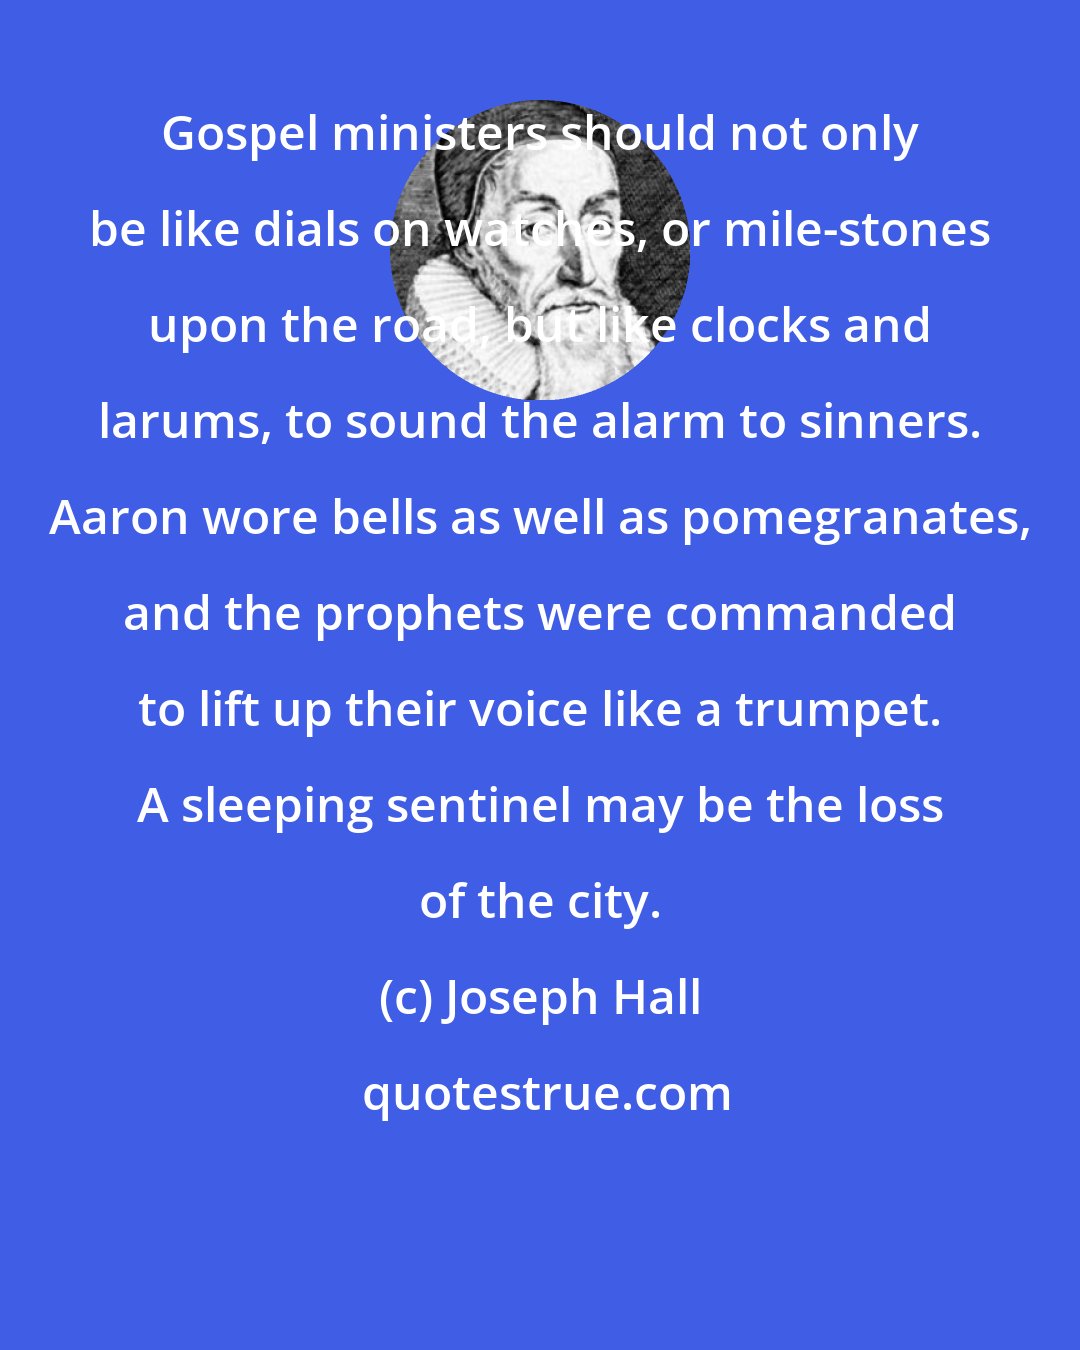 Joseph Hall: Gospel ministers should not only be like dials on watches, or mile-stones upon the road, but like clocks and larums, to sound the alarm to sinners. Aaron wore bells as well as pomegranates, and the prophets were commanded to lift up their voice like a trumpet. A sleeping sentinel may be the loss of the city.